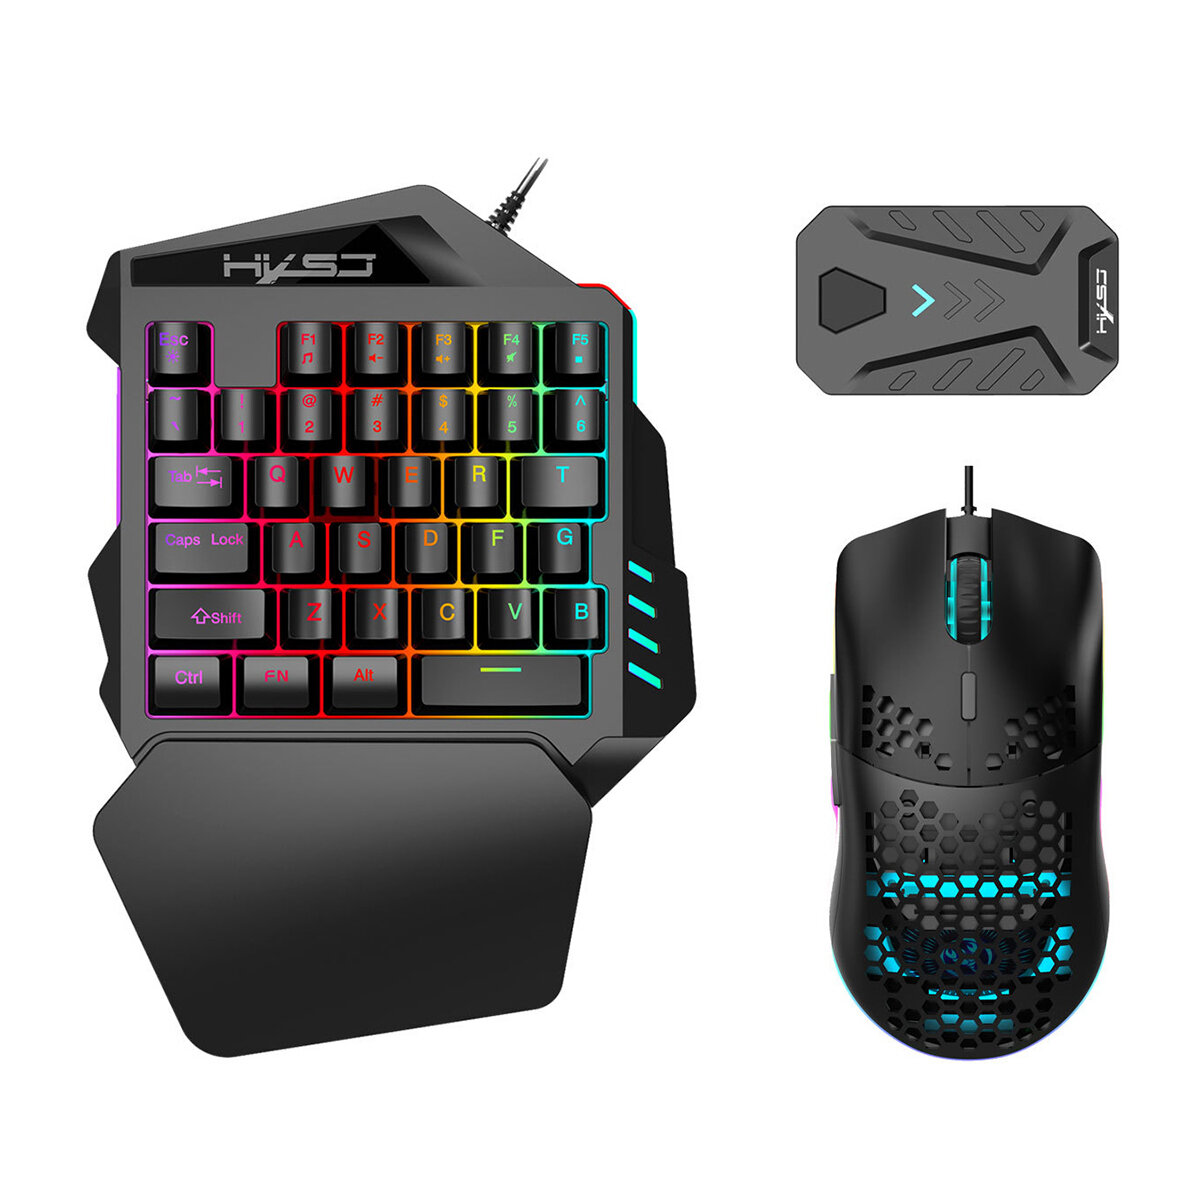 

HXSJ Keyboard+Mouse+Converter Combo Wired RGB Honeycomb Hollow Gaming Mouse V100 35 Keys Single-hand Gaming Keyboard Swi